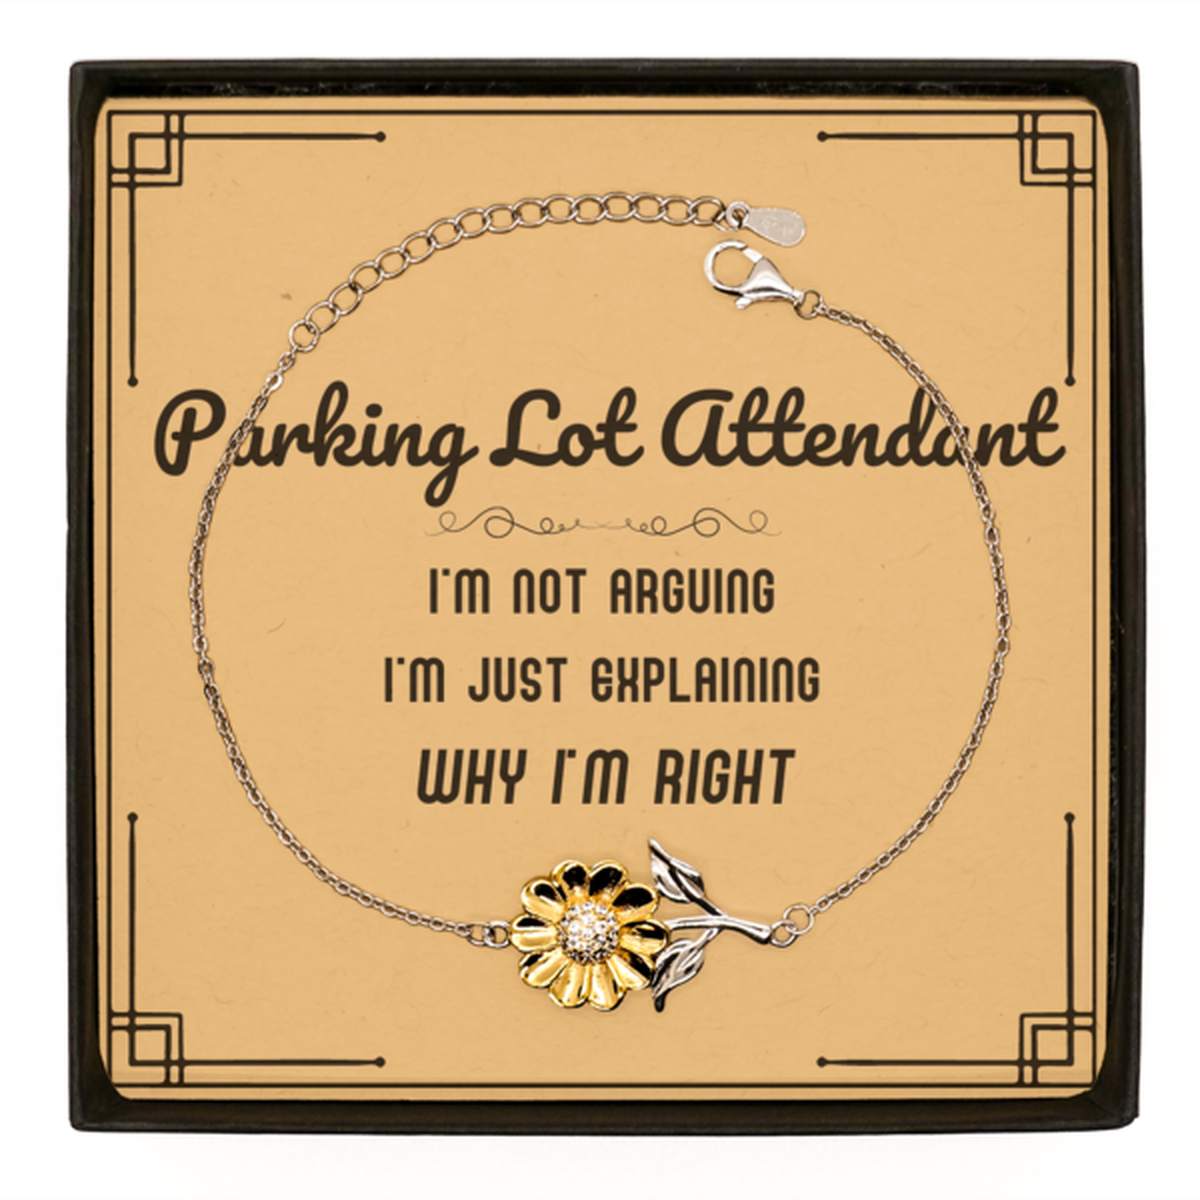 Parking Lot Attendant I'm not Arguing. I'm Just Explaining Why I'm RIGHT Sunflower Bracelet, Funny Saying Quote Parking Lot Attendant Gifts For Parking Lot Attendant Message Card Graduation Birthday Christmas Gifts for Men Women Coworker